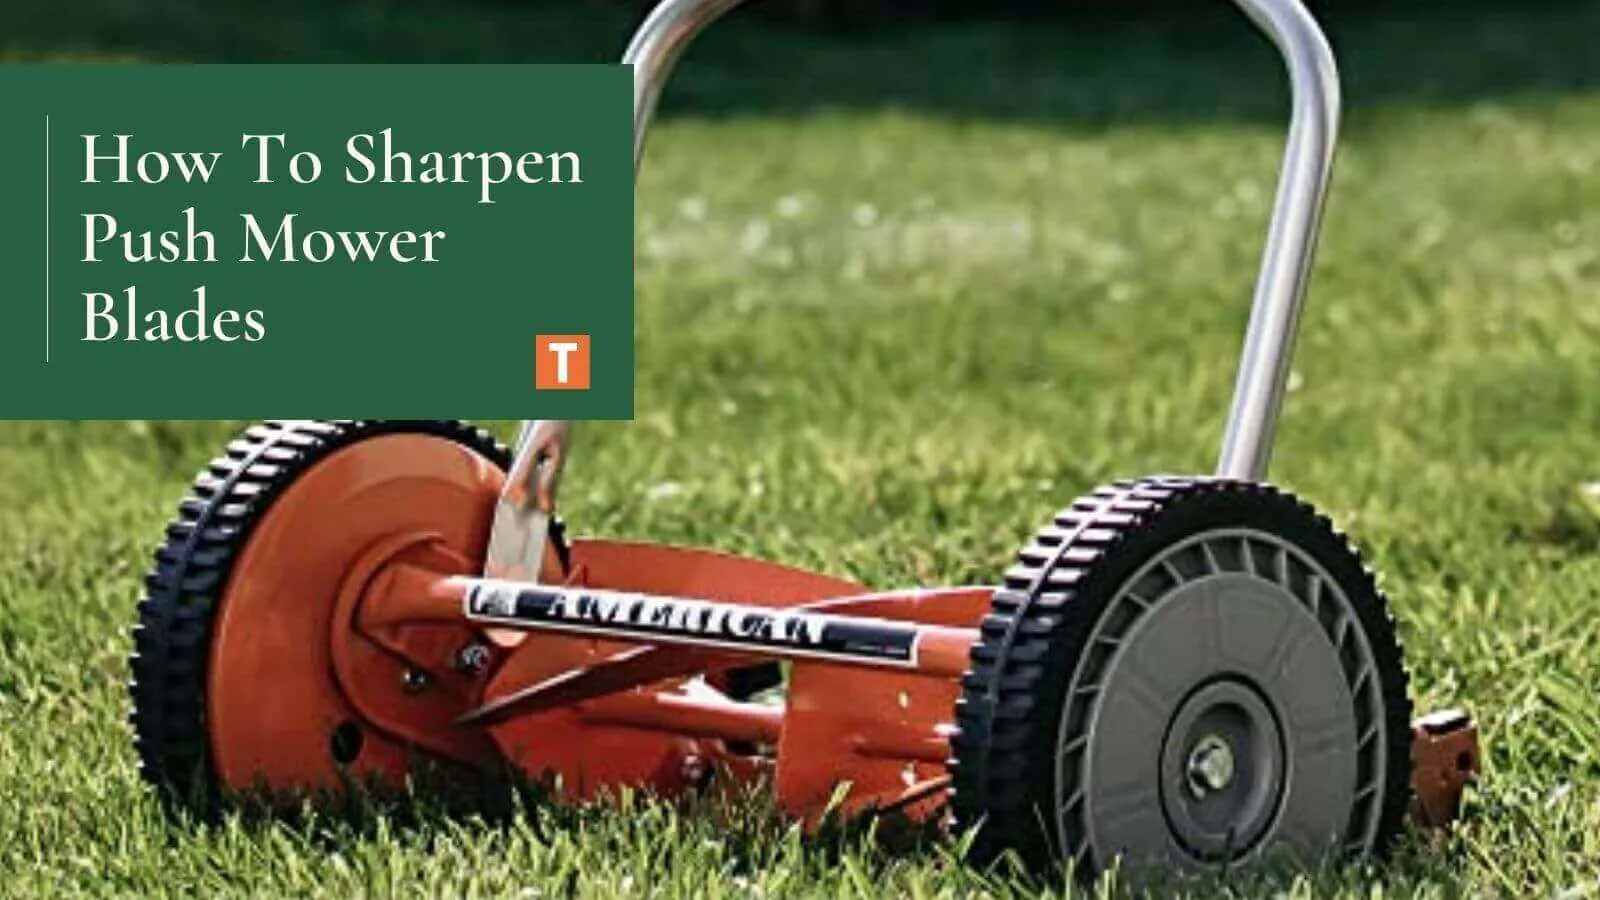 Red reel lawn mower on grass